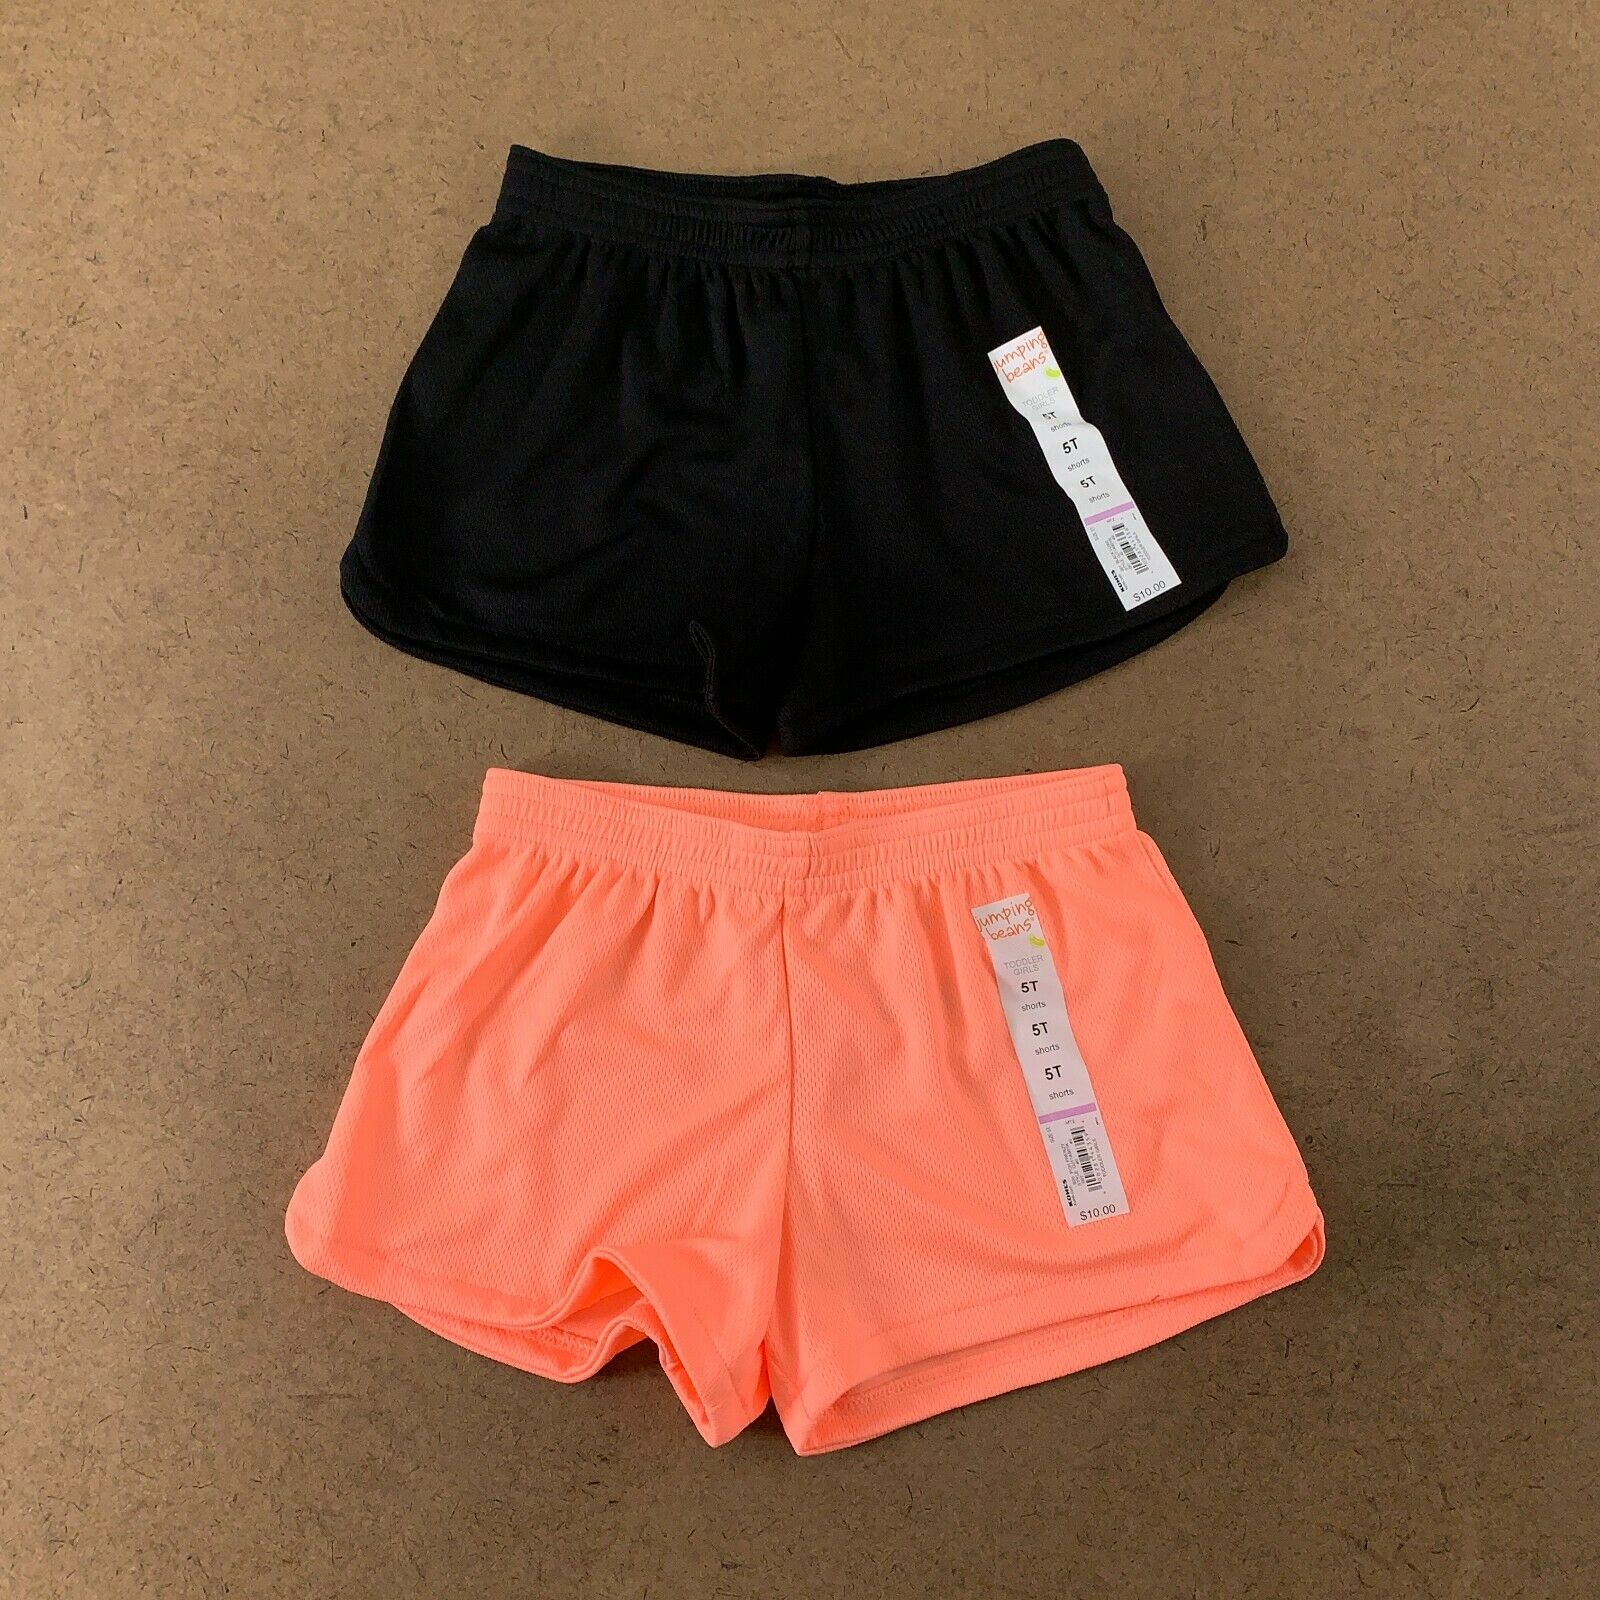 Lot Of 2 Jumping Beans Toddler Girl Size 5t Black/peach Athletic Short Nwt *flaw